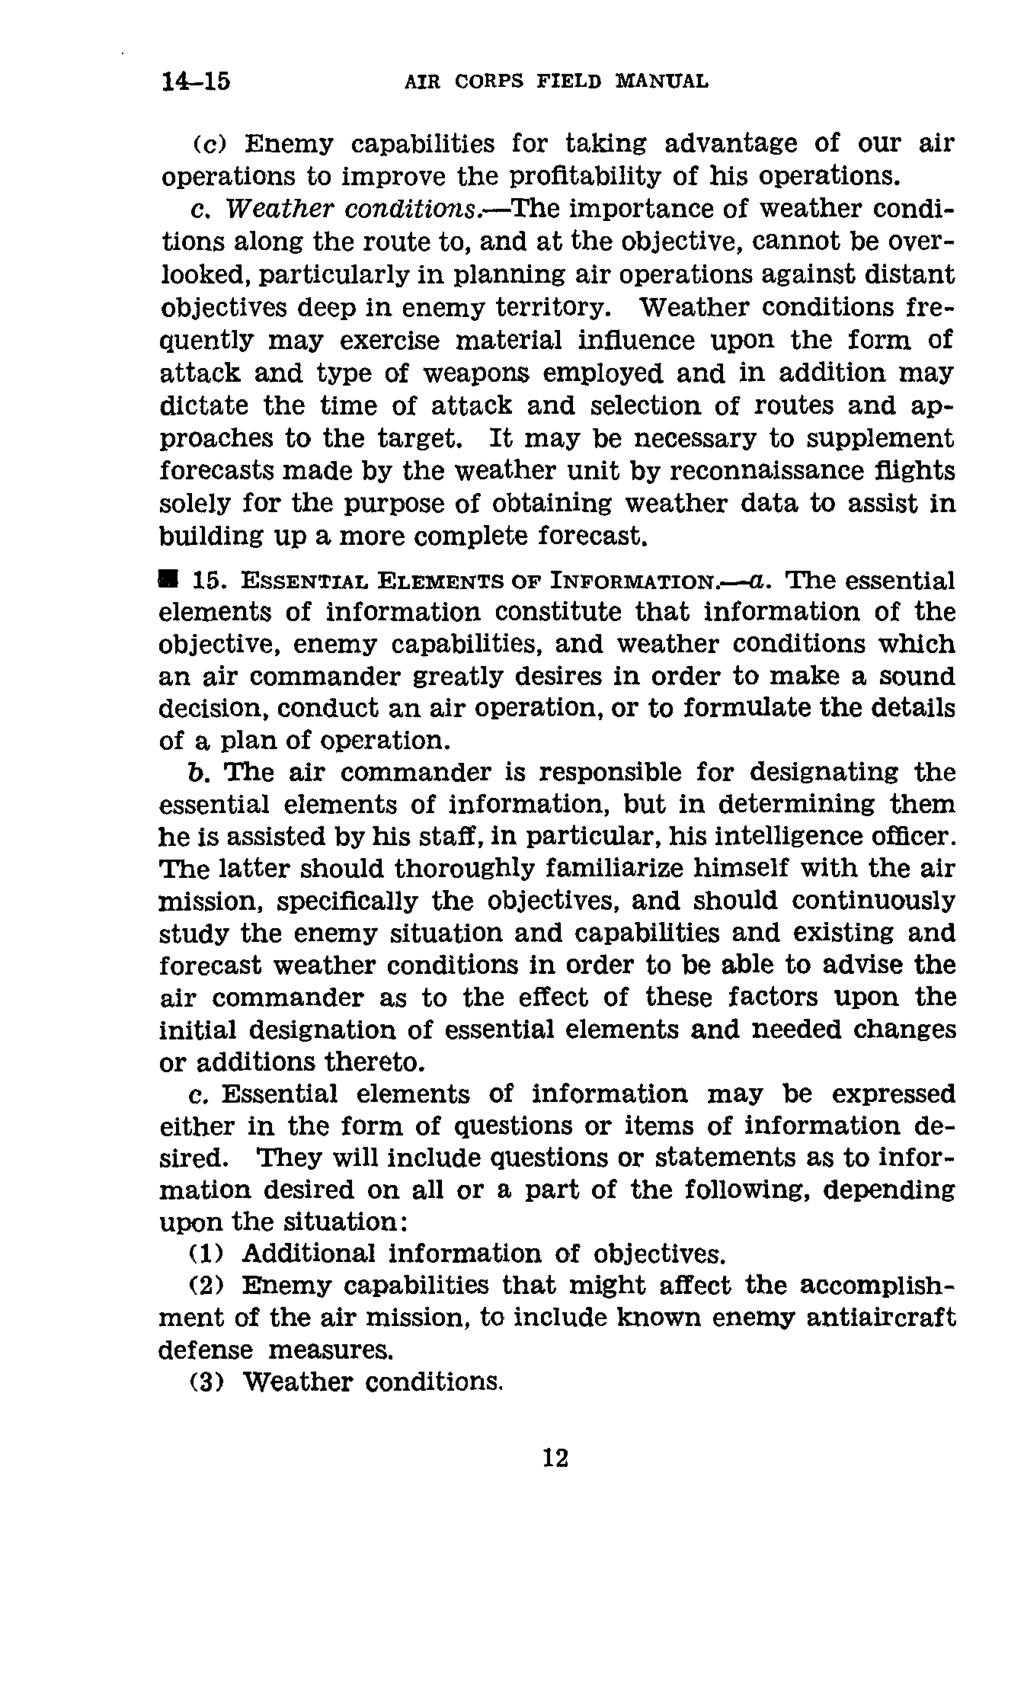 14-15 AIR CORPS FIELD MANUAL (c) Enemy capabilities for taking advantage of our air operations to improve the profitability of his operations. c. Weather conditions.